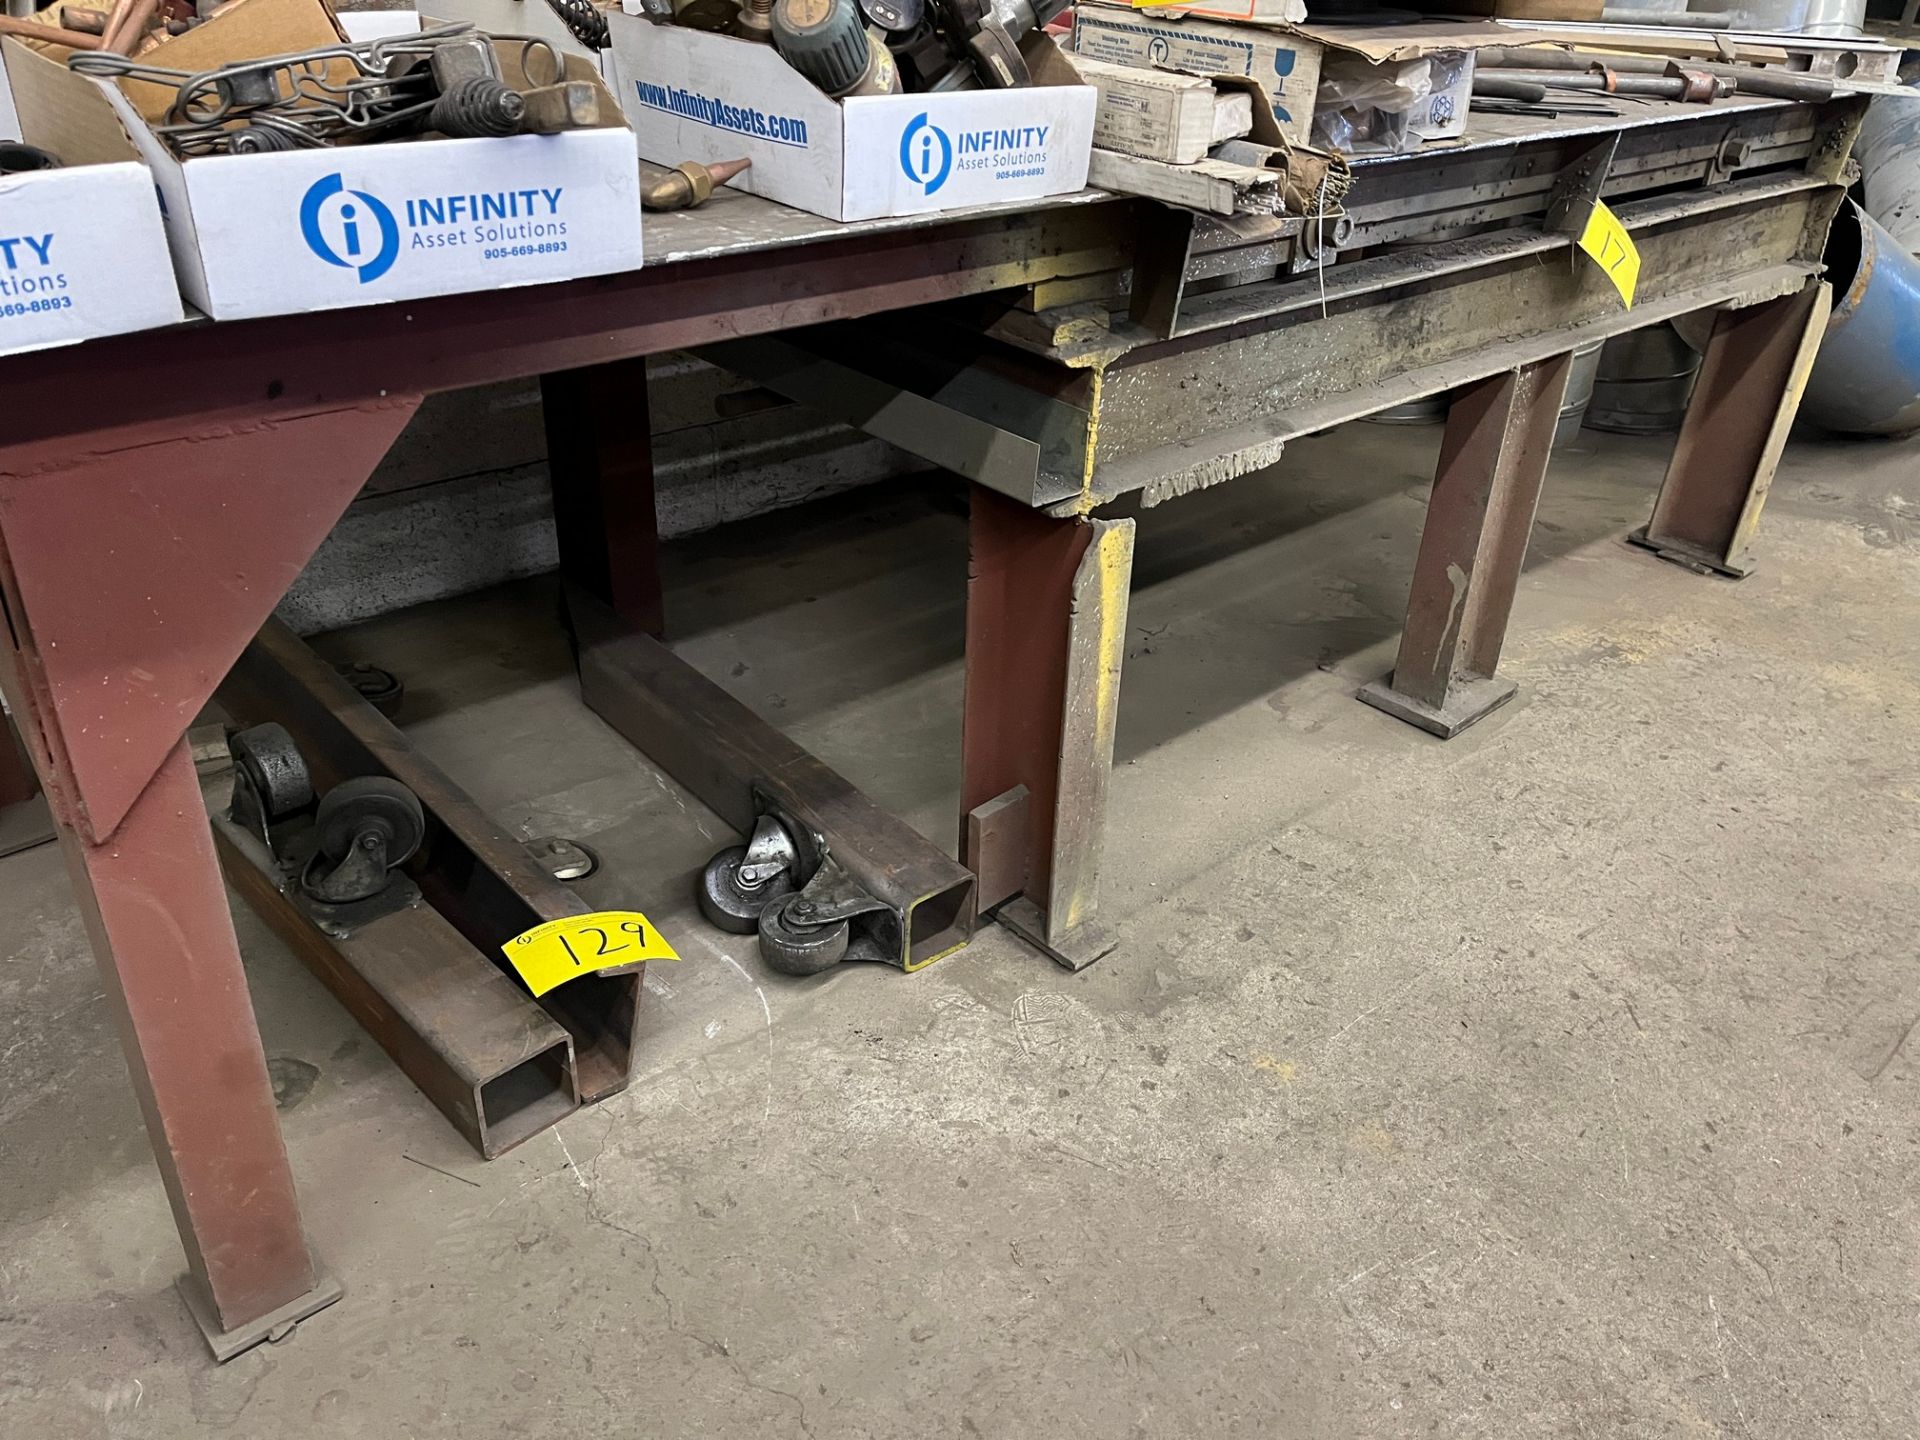 APPROX. 9'L X 3.5'W WELDING TABLE W/ SQUARE INSERT PLATE